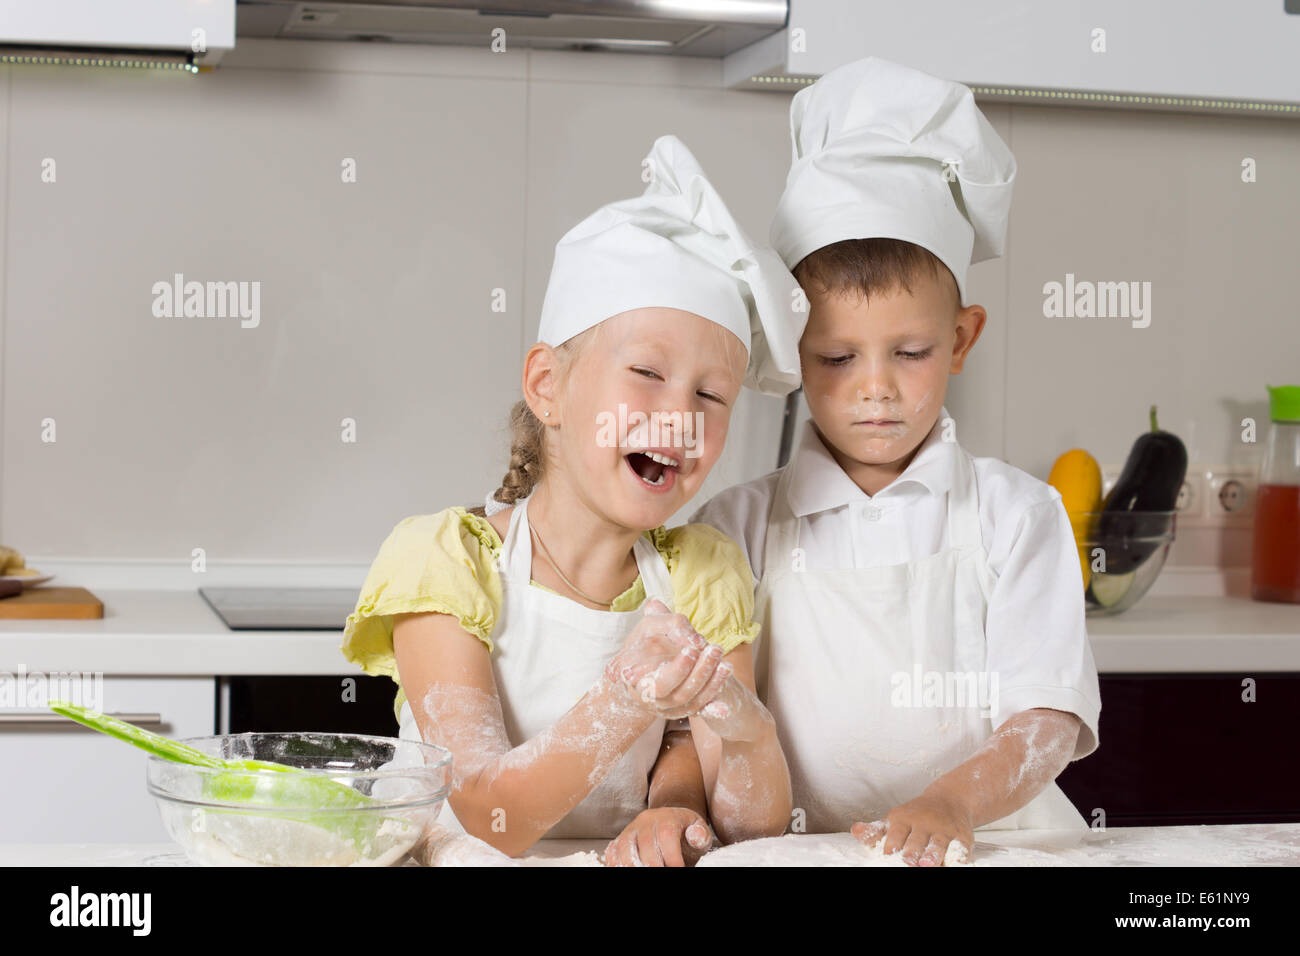 Missy Little Chefs Baking Something to Eat in Kitchen Stock Photo